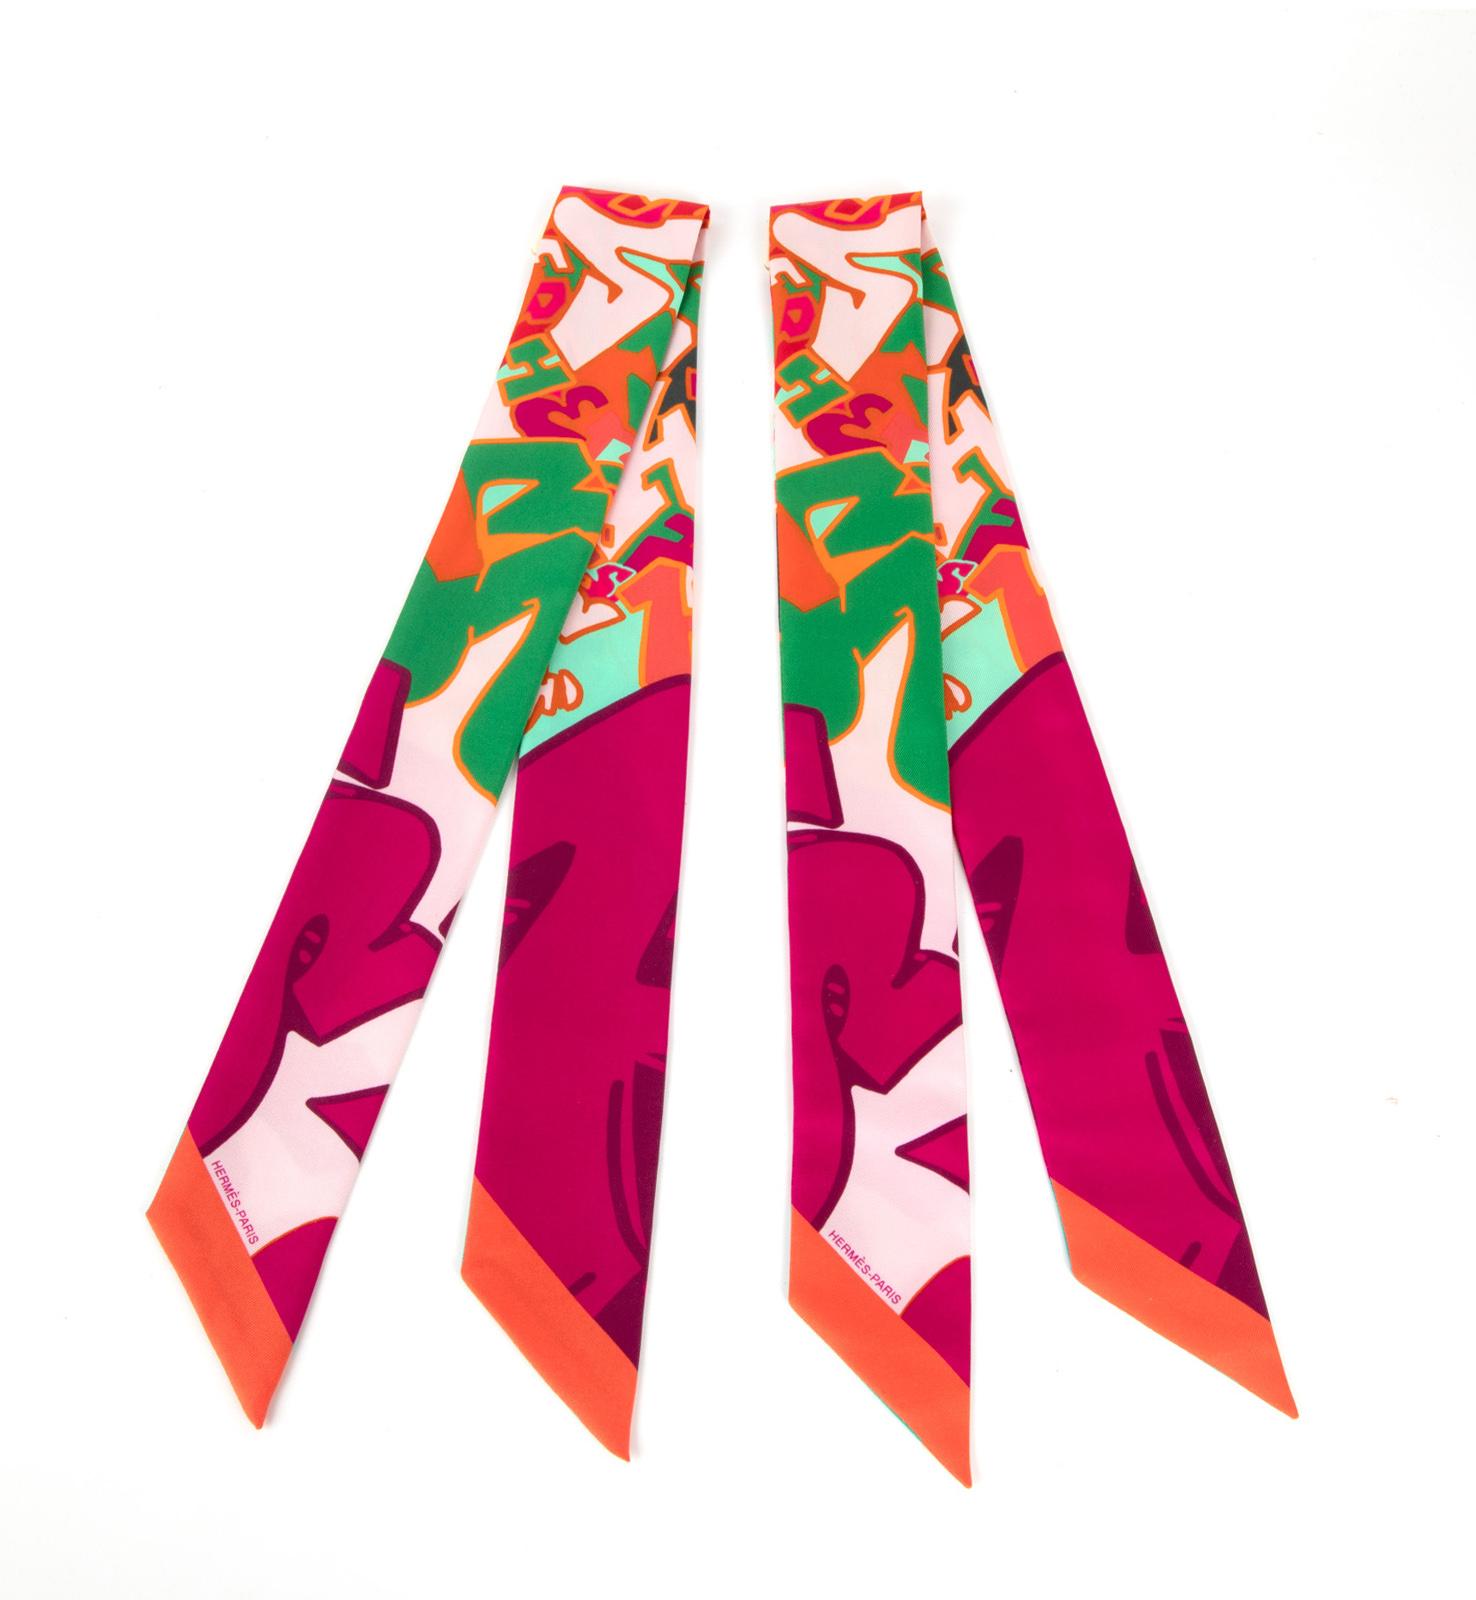 Guaranteed authentic Hermes Twilly Graff - Graffiti - by Kongo.
Glorious fresh summer Fucshia Orange and Green. SO pretty.
Each one comes with Hermes box and ribbon.
NEW or  NEVER WORN.
final sale

SIZE
32